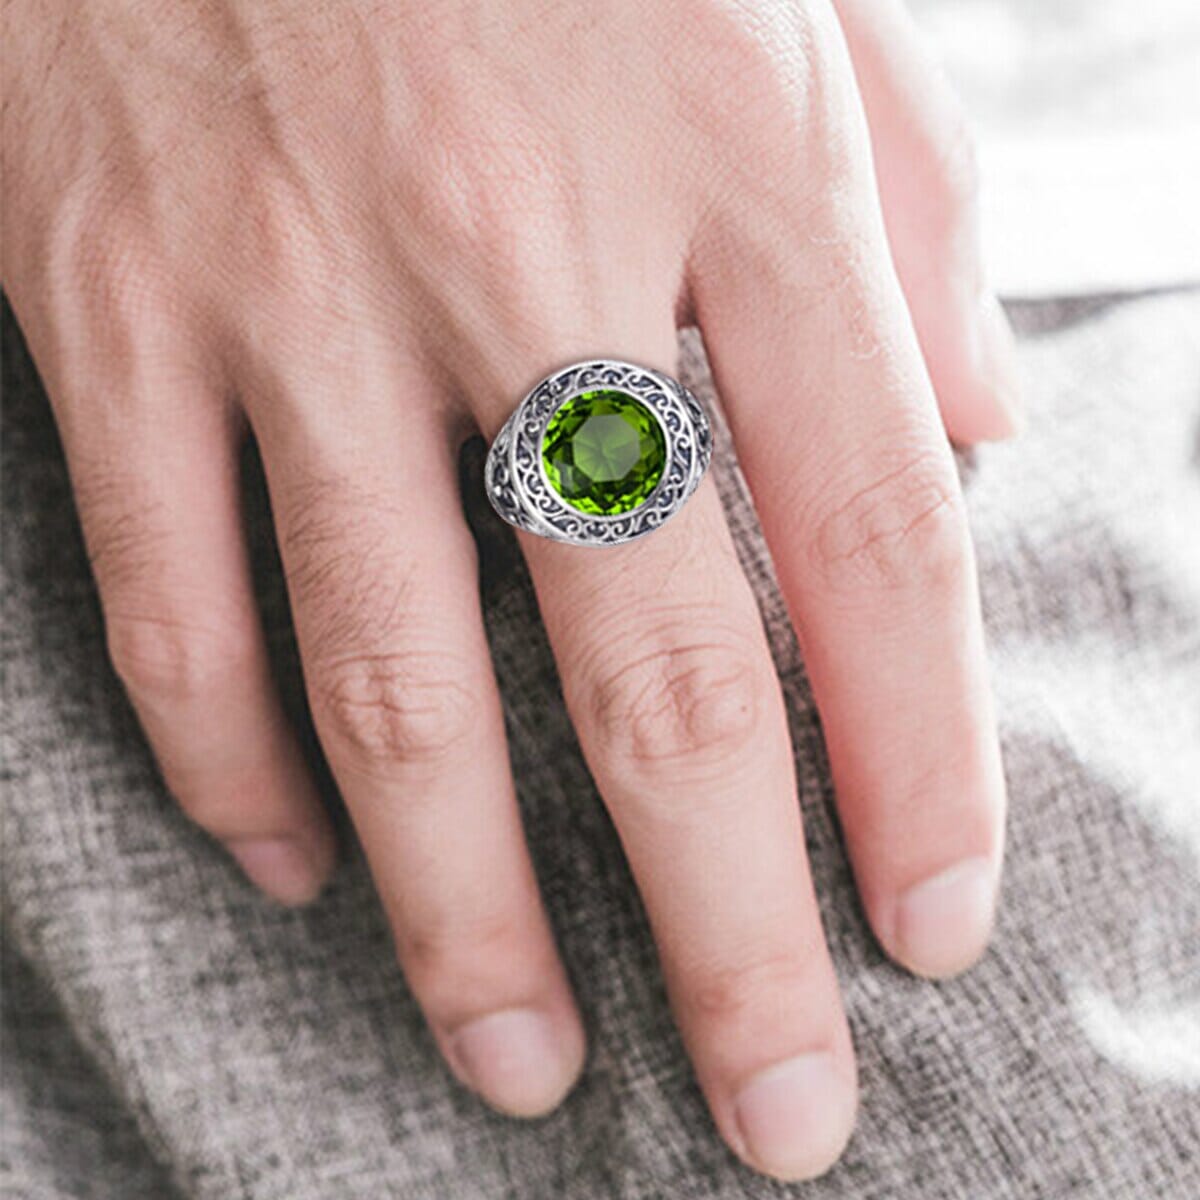 Gothic Design Peridot 925 Sterling Silver Ring0